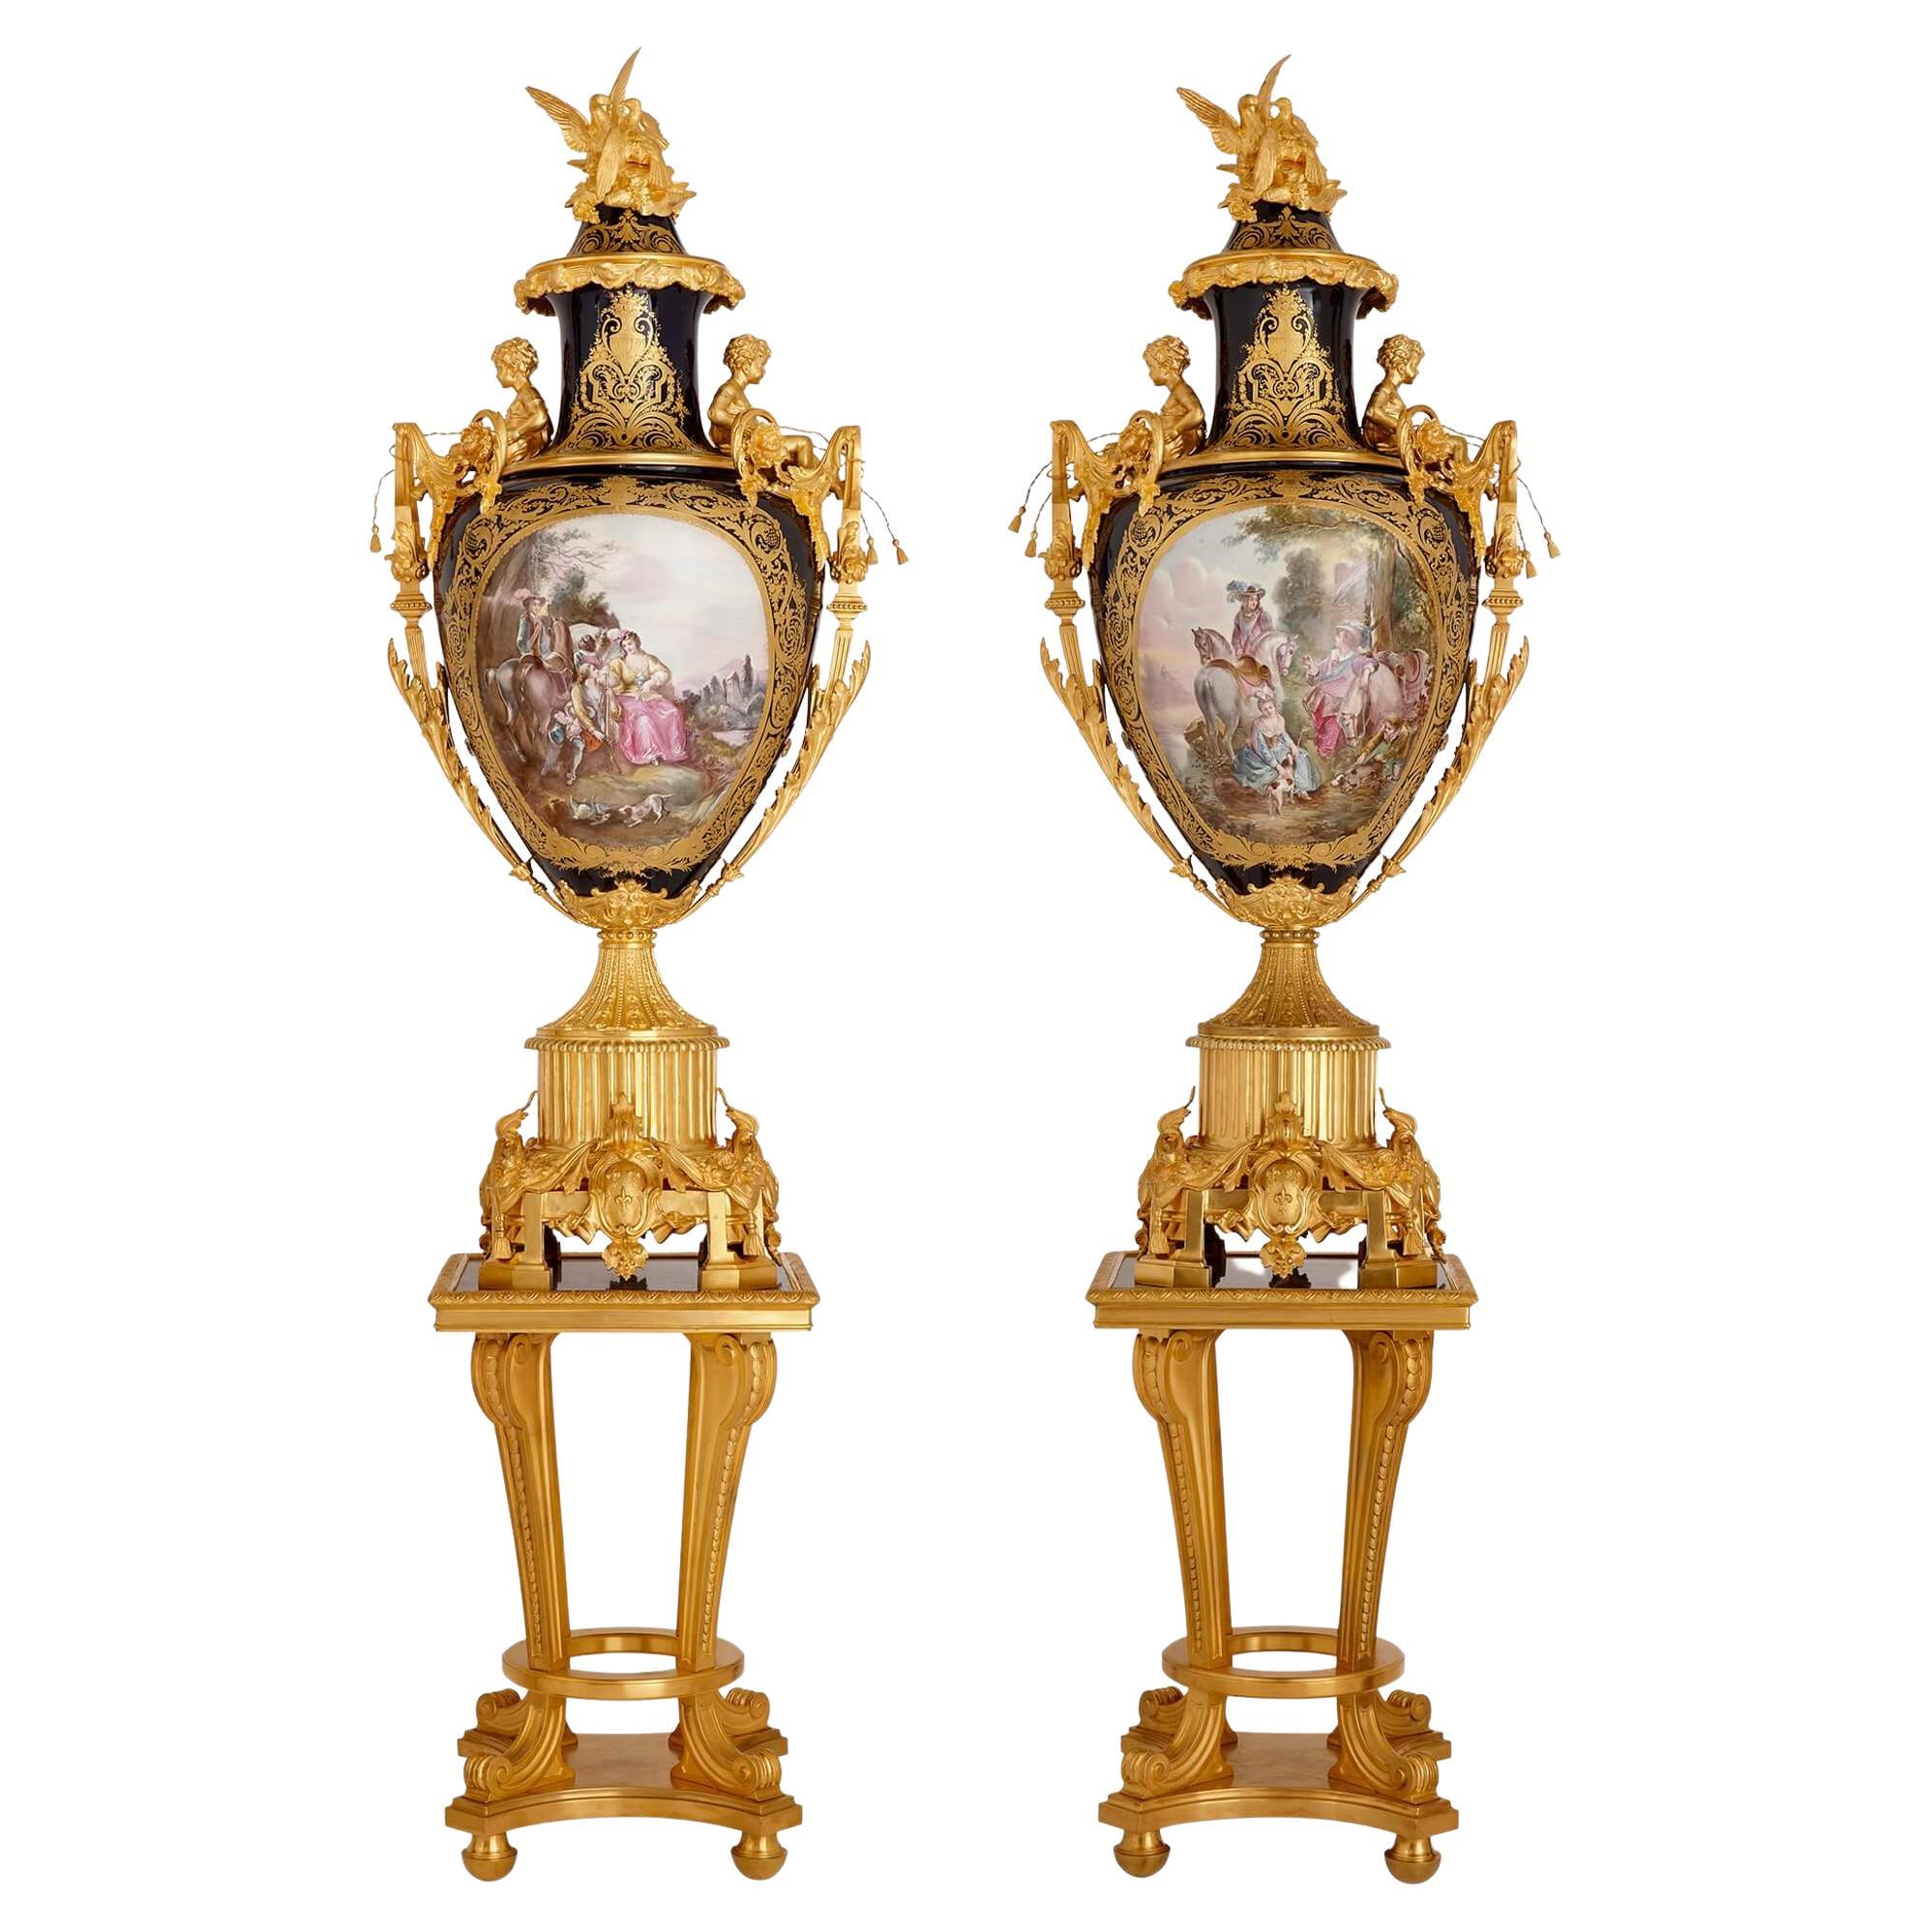 Pair of Large Gilt-Bronze Mounted Sèvres-style Porcelain Vases with Pedestals For Sale